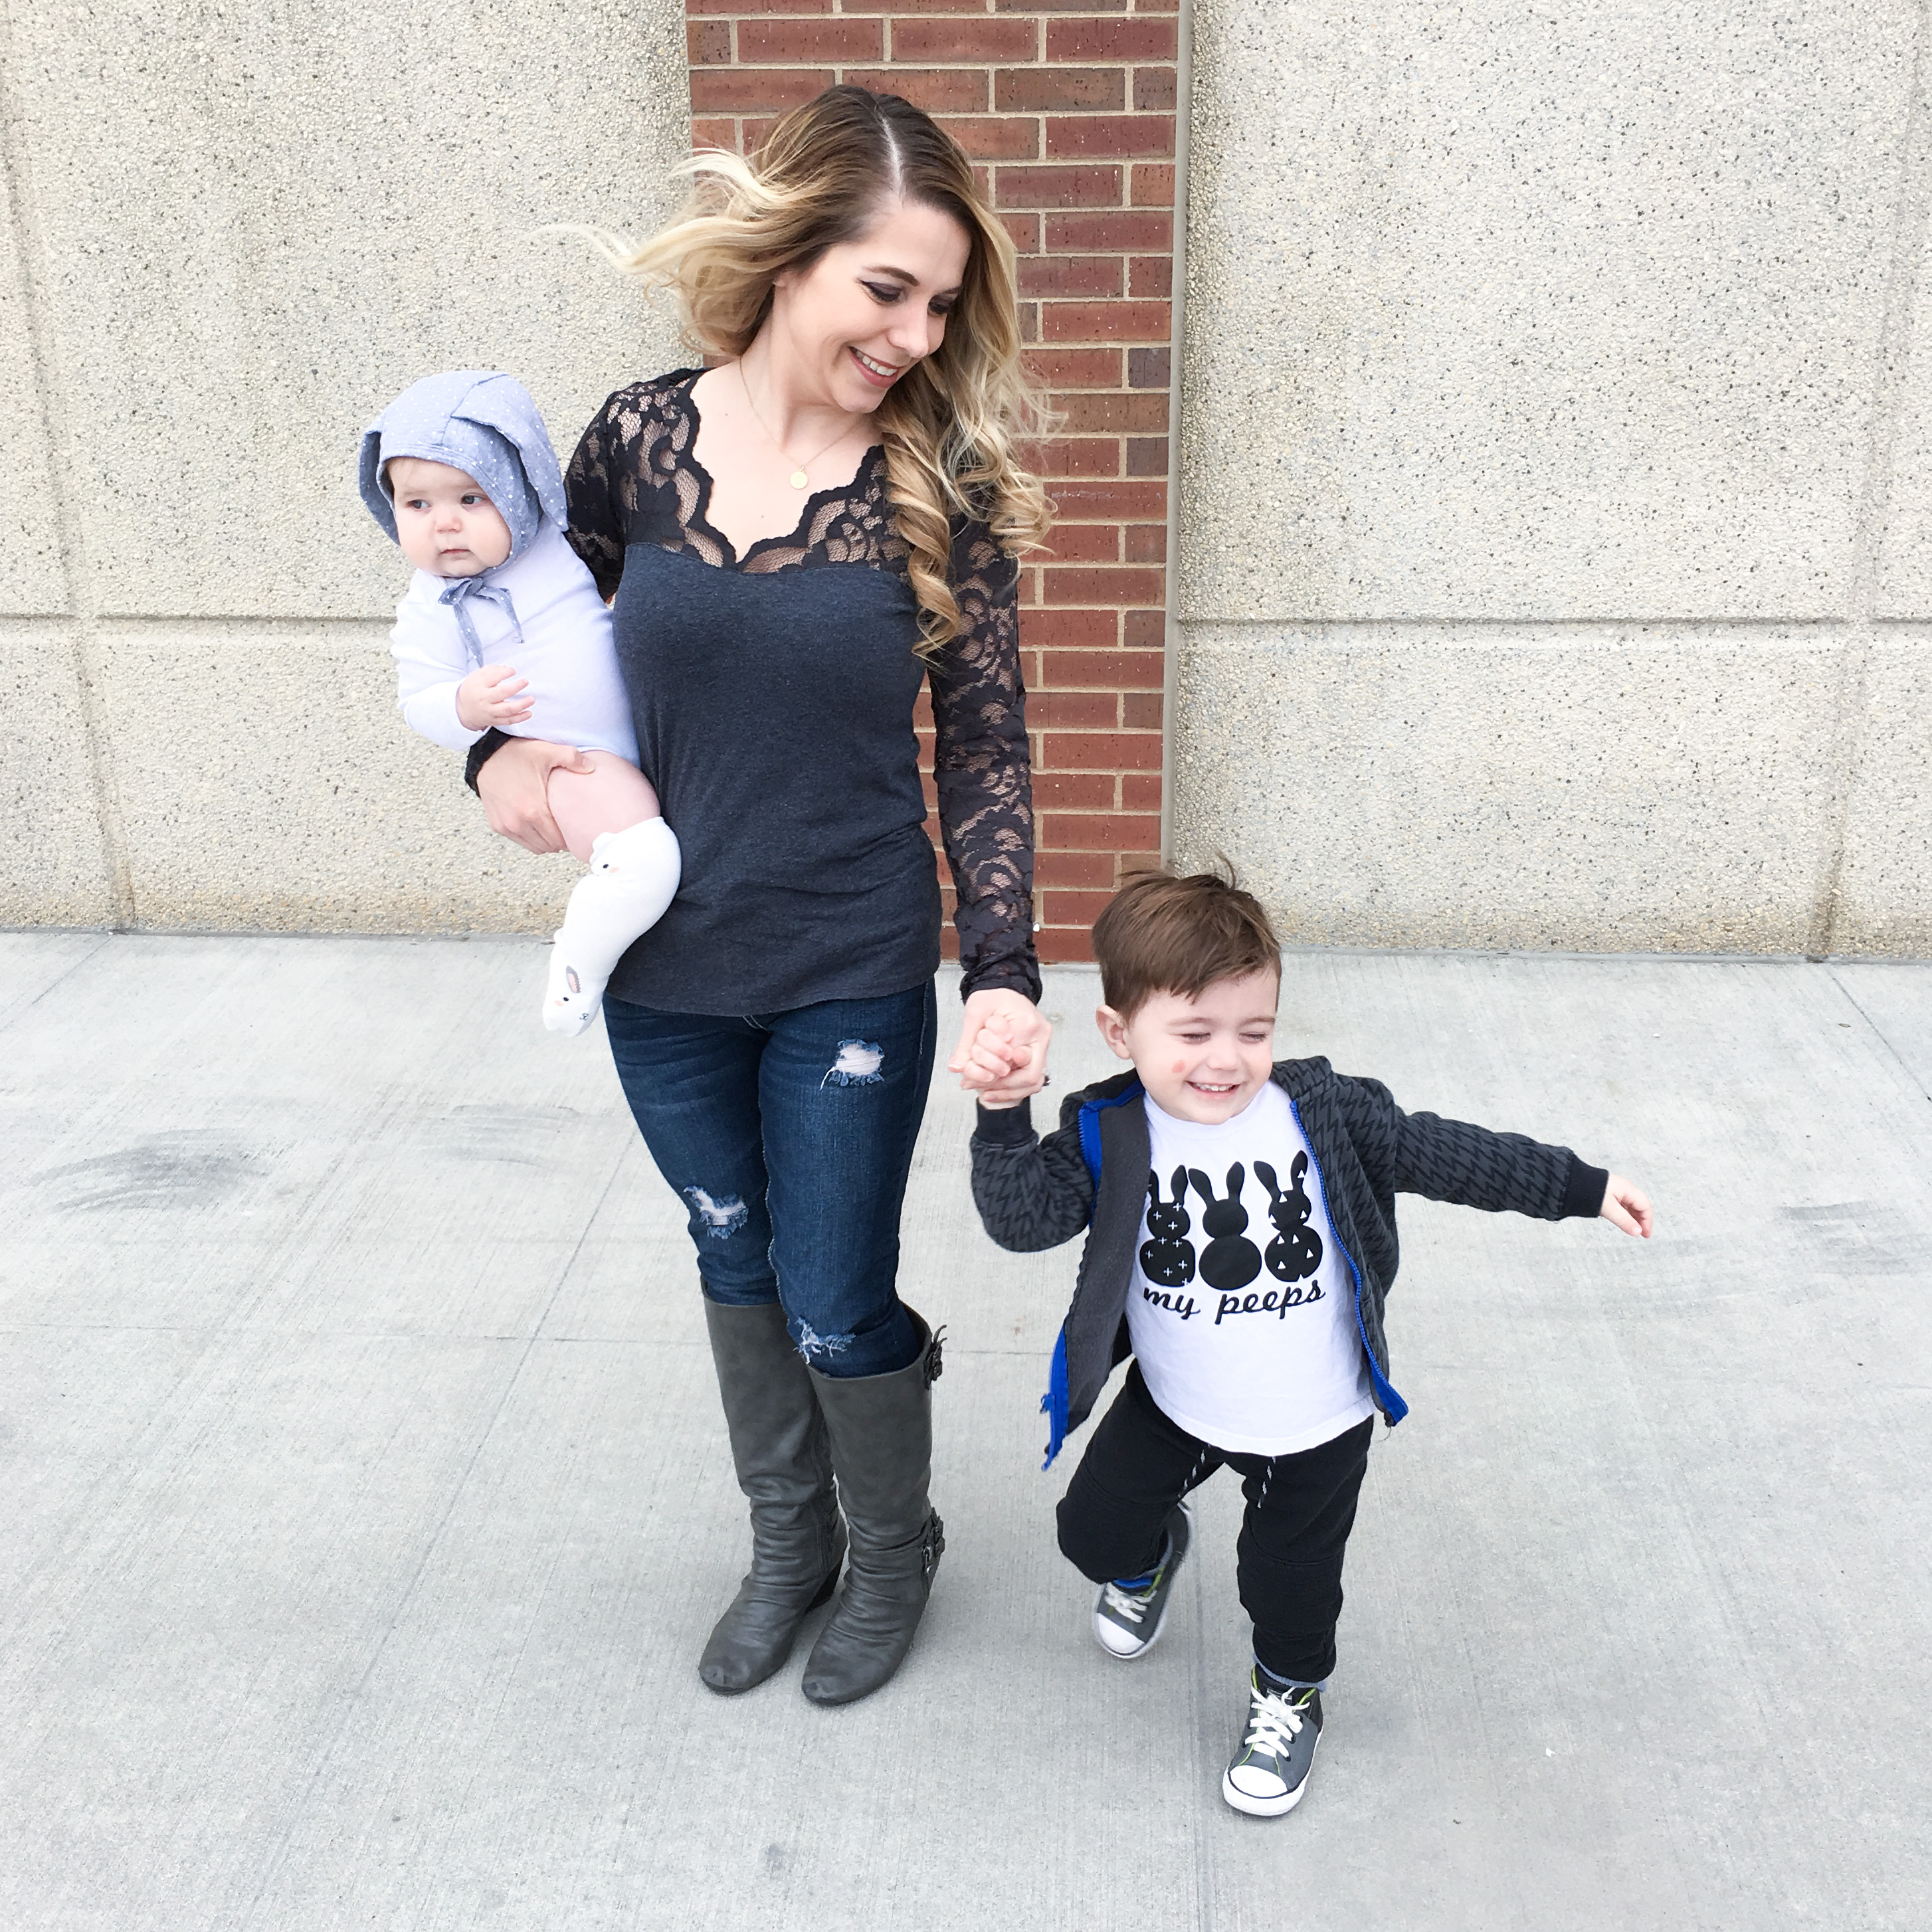 I'm Not a Super Mom... and I Don't Care: I'm not a Pinterest mom, as much as I try to be. I feel like I come up short as a mom, wife, and everything else, basically all the time. But at the end of the day, my kids are loved and that's all that matters. A mom's reflections on why it's OK to not be a super mom.